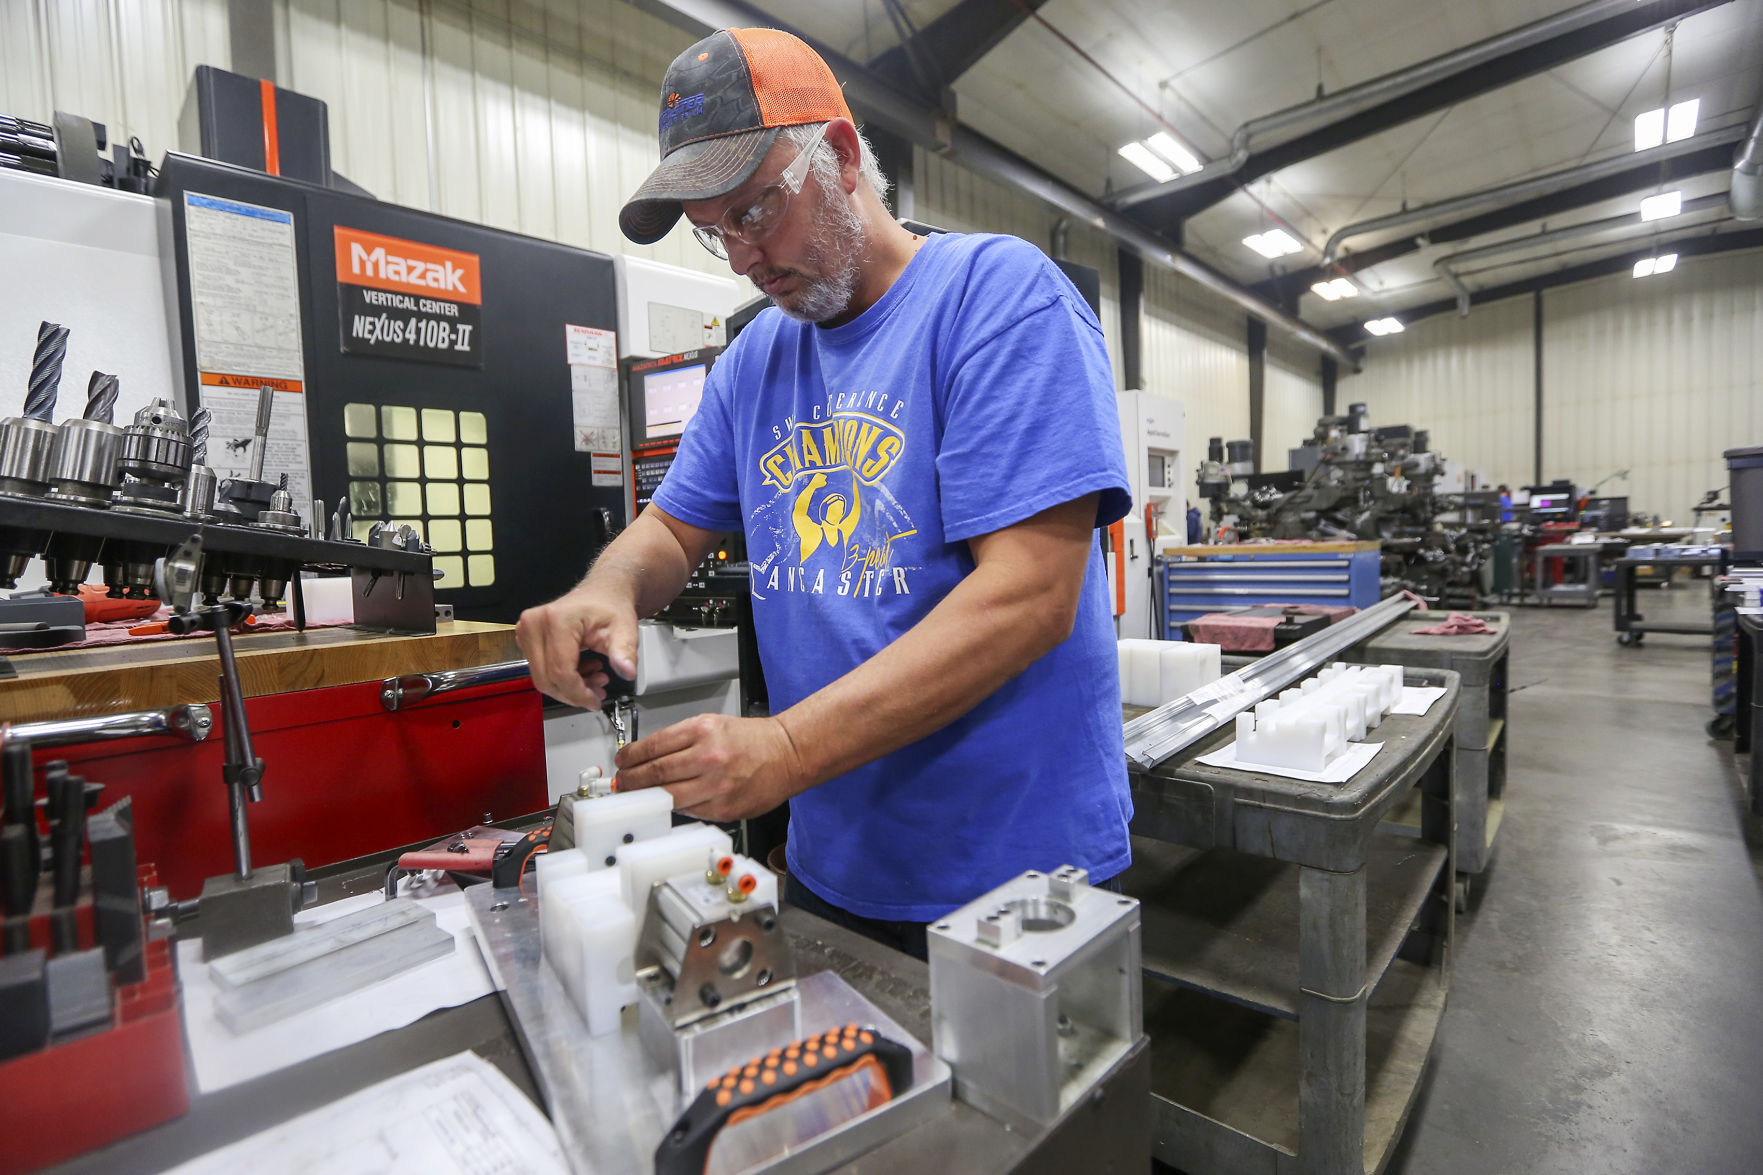 Tony Gundlach assembles a component for a custom CNC machine at Lancaster Machine & Tool on Thursday, Oct. 26, 2017, in Lancaster, Wis.    PHOTO CREDIT: NICKI KOHL